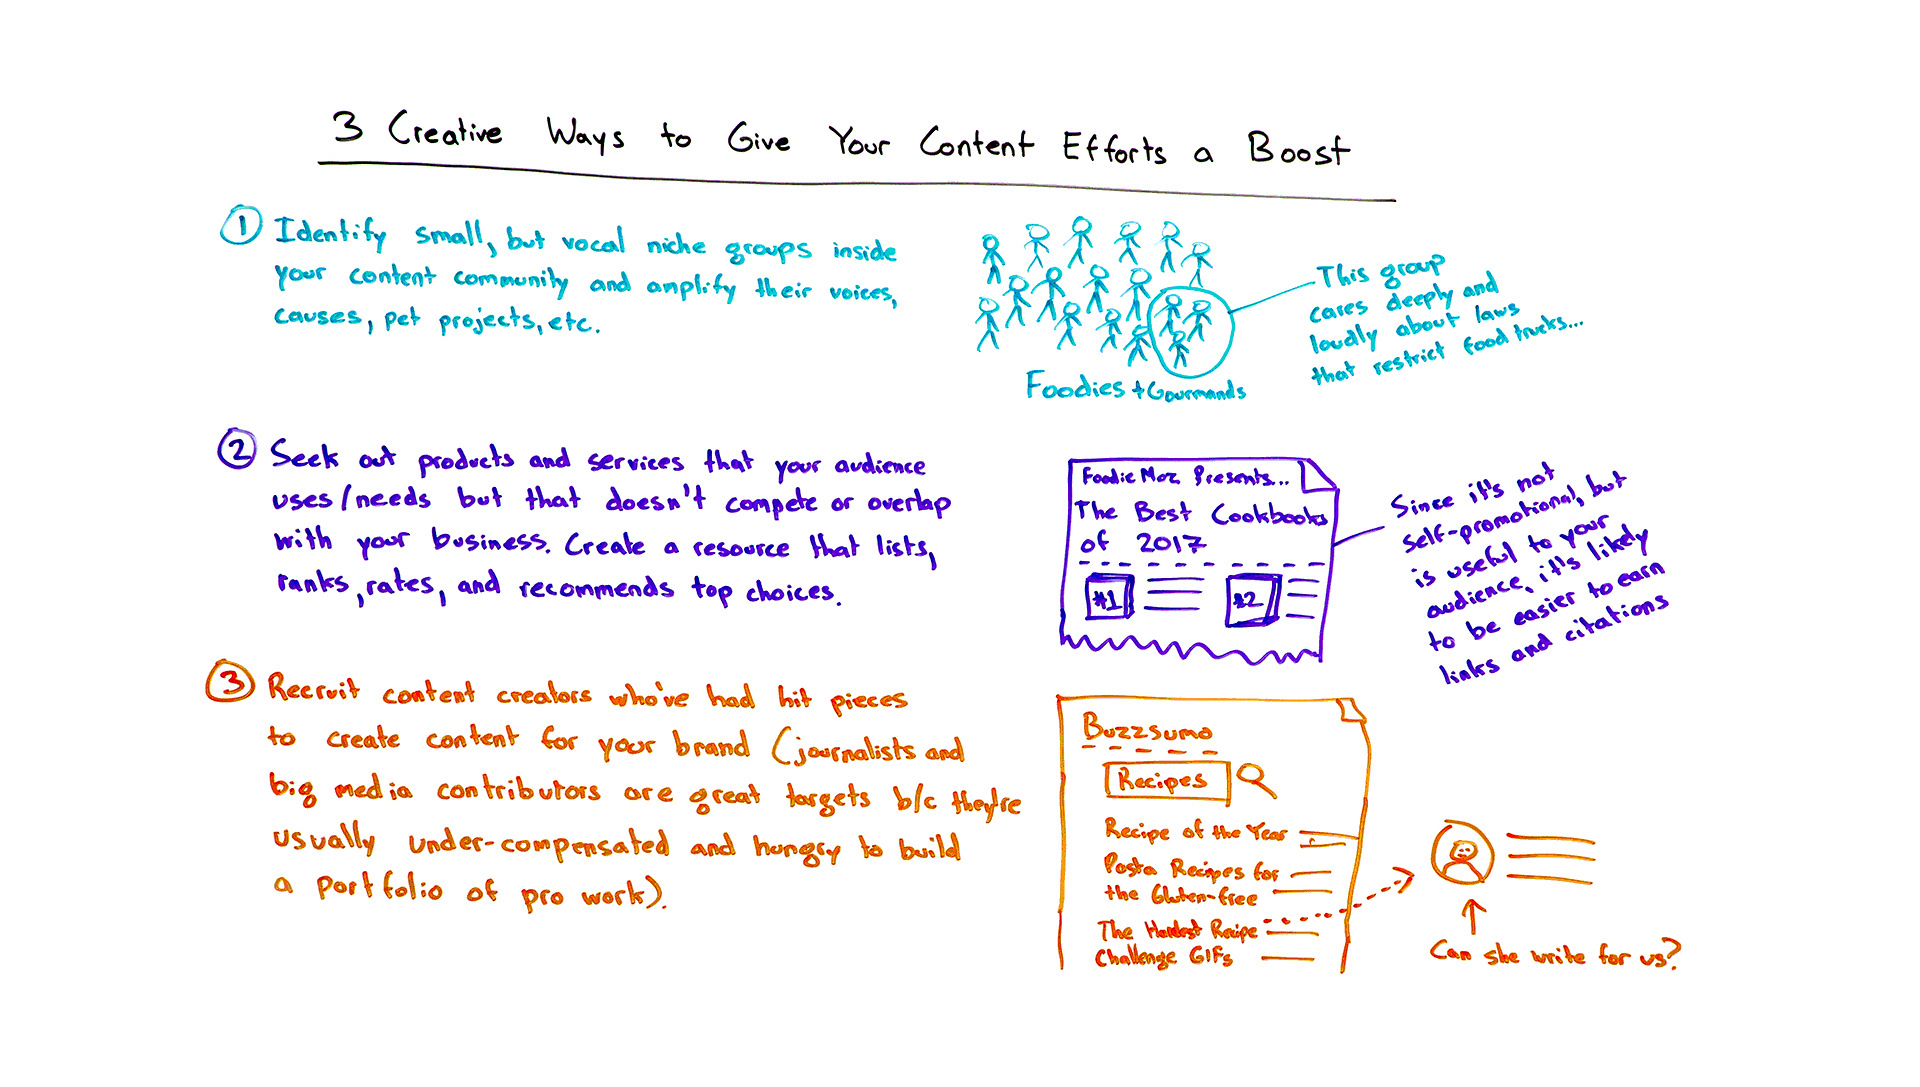 3 way to give your content efforts a boost